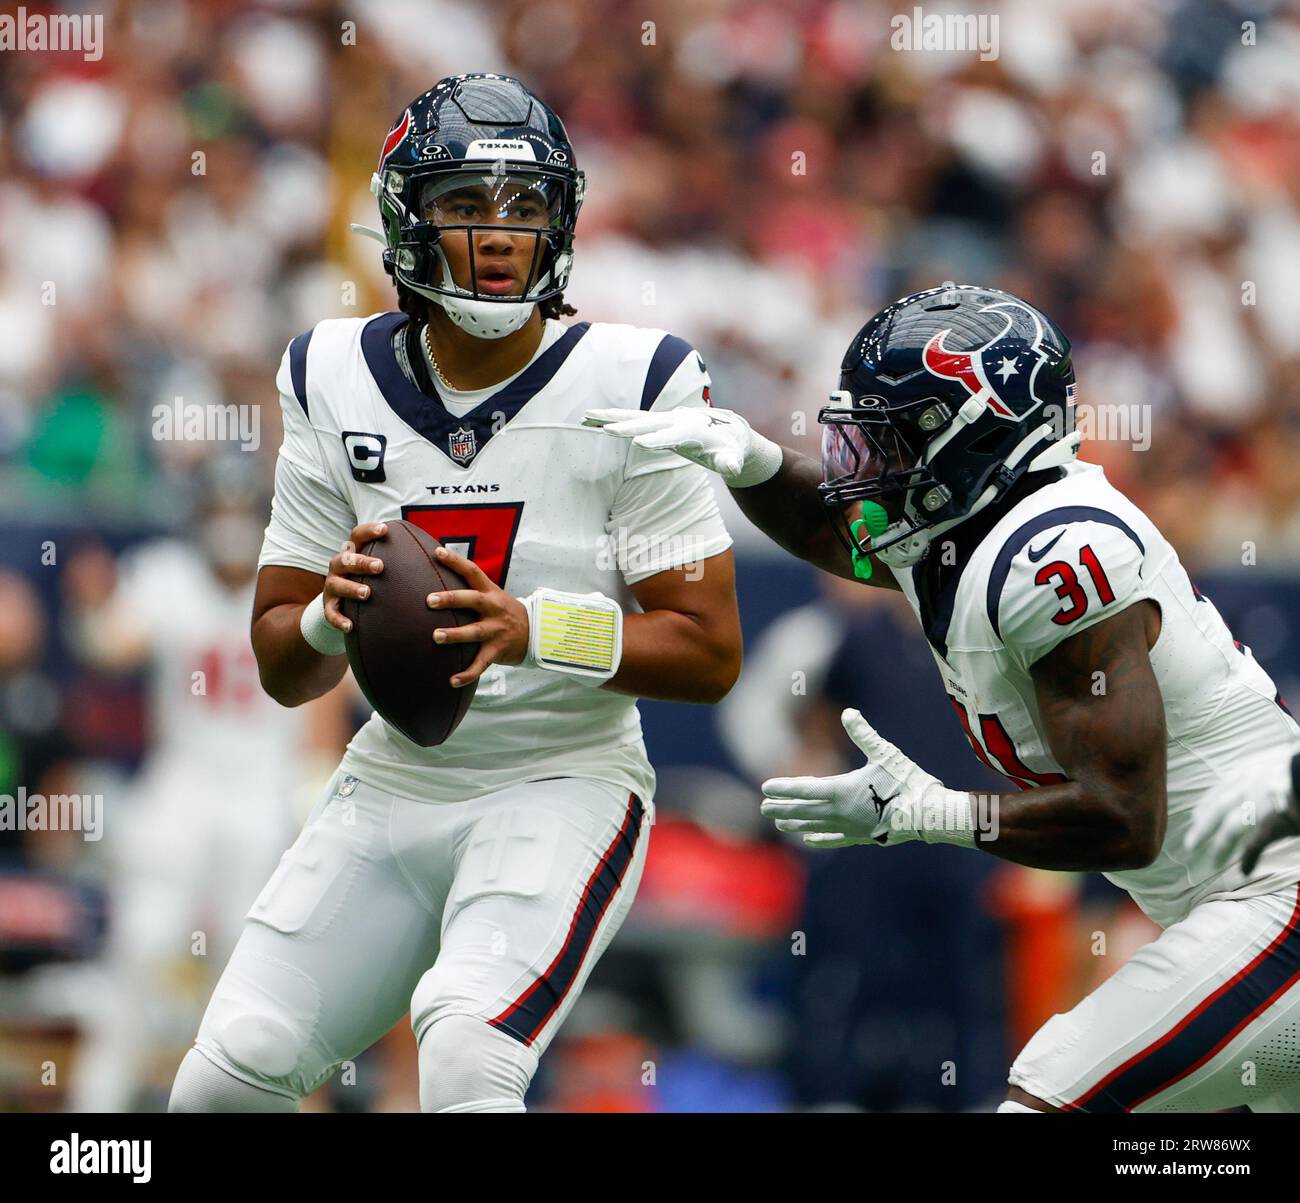 Houston, Texas, USA. September 17, 2023: Texans quarterback C.J. Stroud (7)  looks to pass the ball during an NFL game between the Texans and the Colts  on September 17, 2023 in Houston.